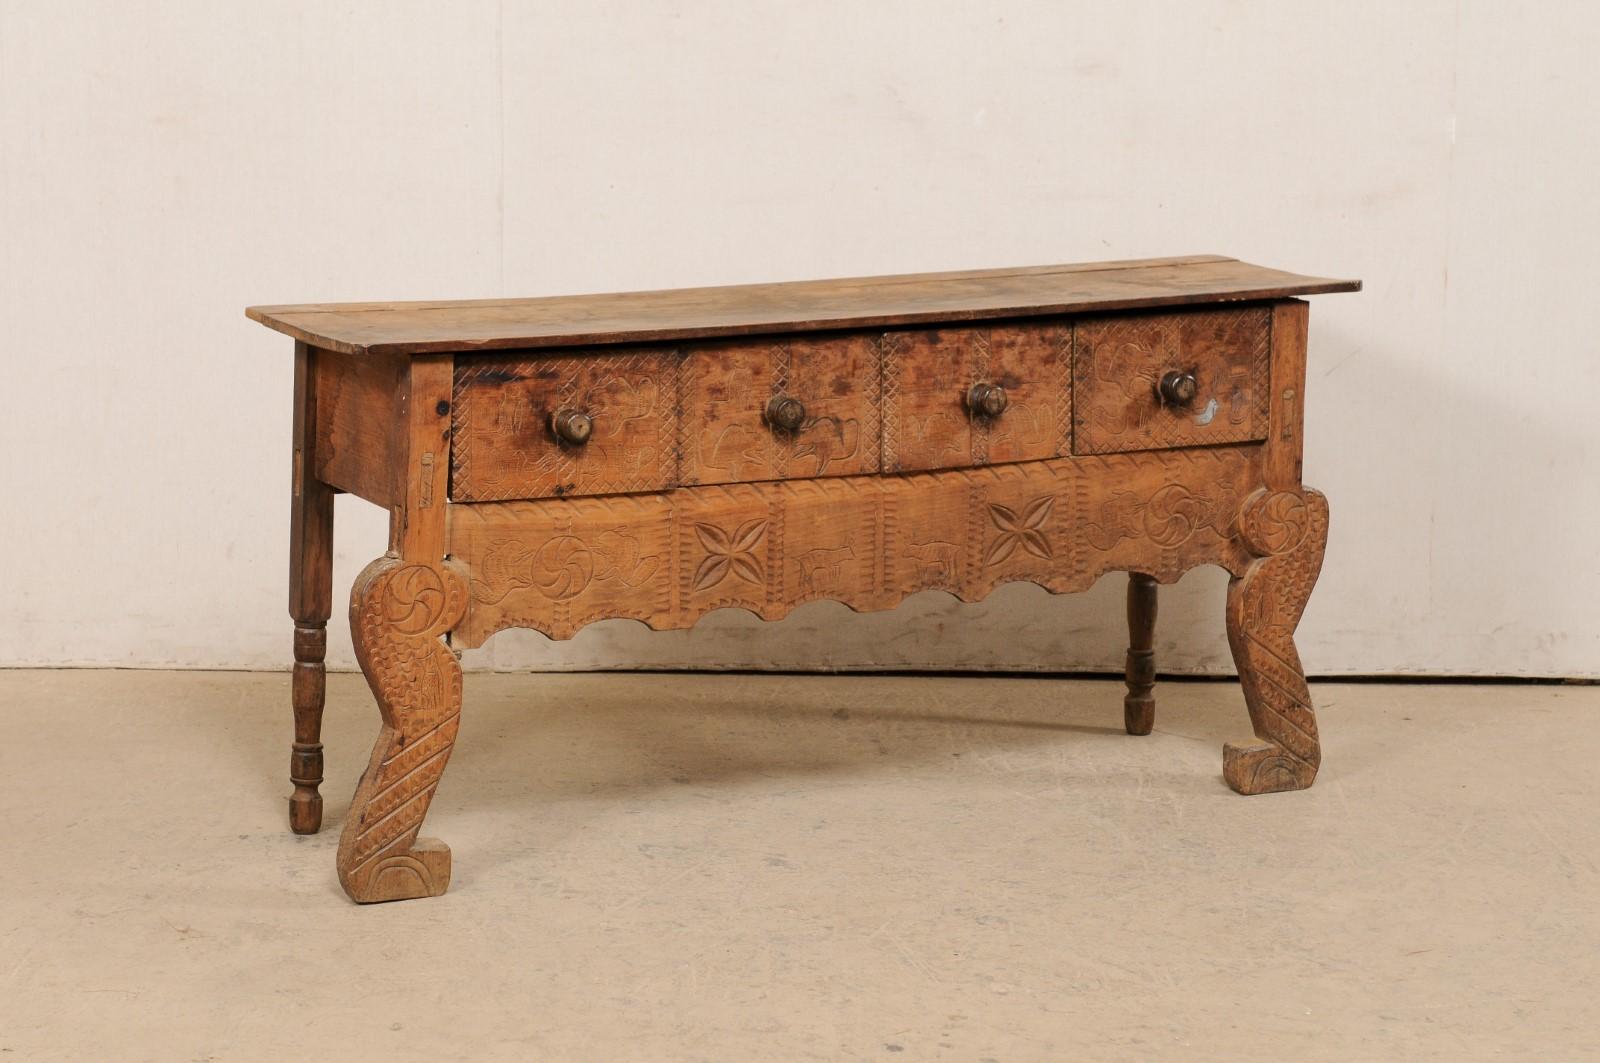 A Spanish Colonial carved wood credenza with drawers and primitive-style carvings, from the early 20th century. This antique console table from Mexico has a carved-front facade which features a whimsical display of swirling medallions, flower heads,